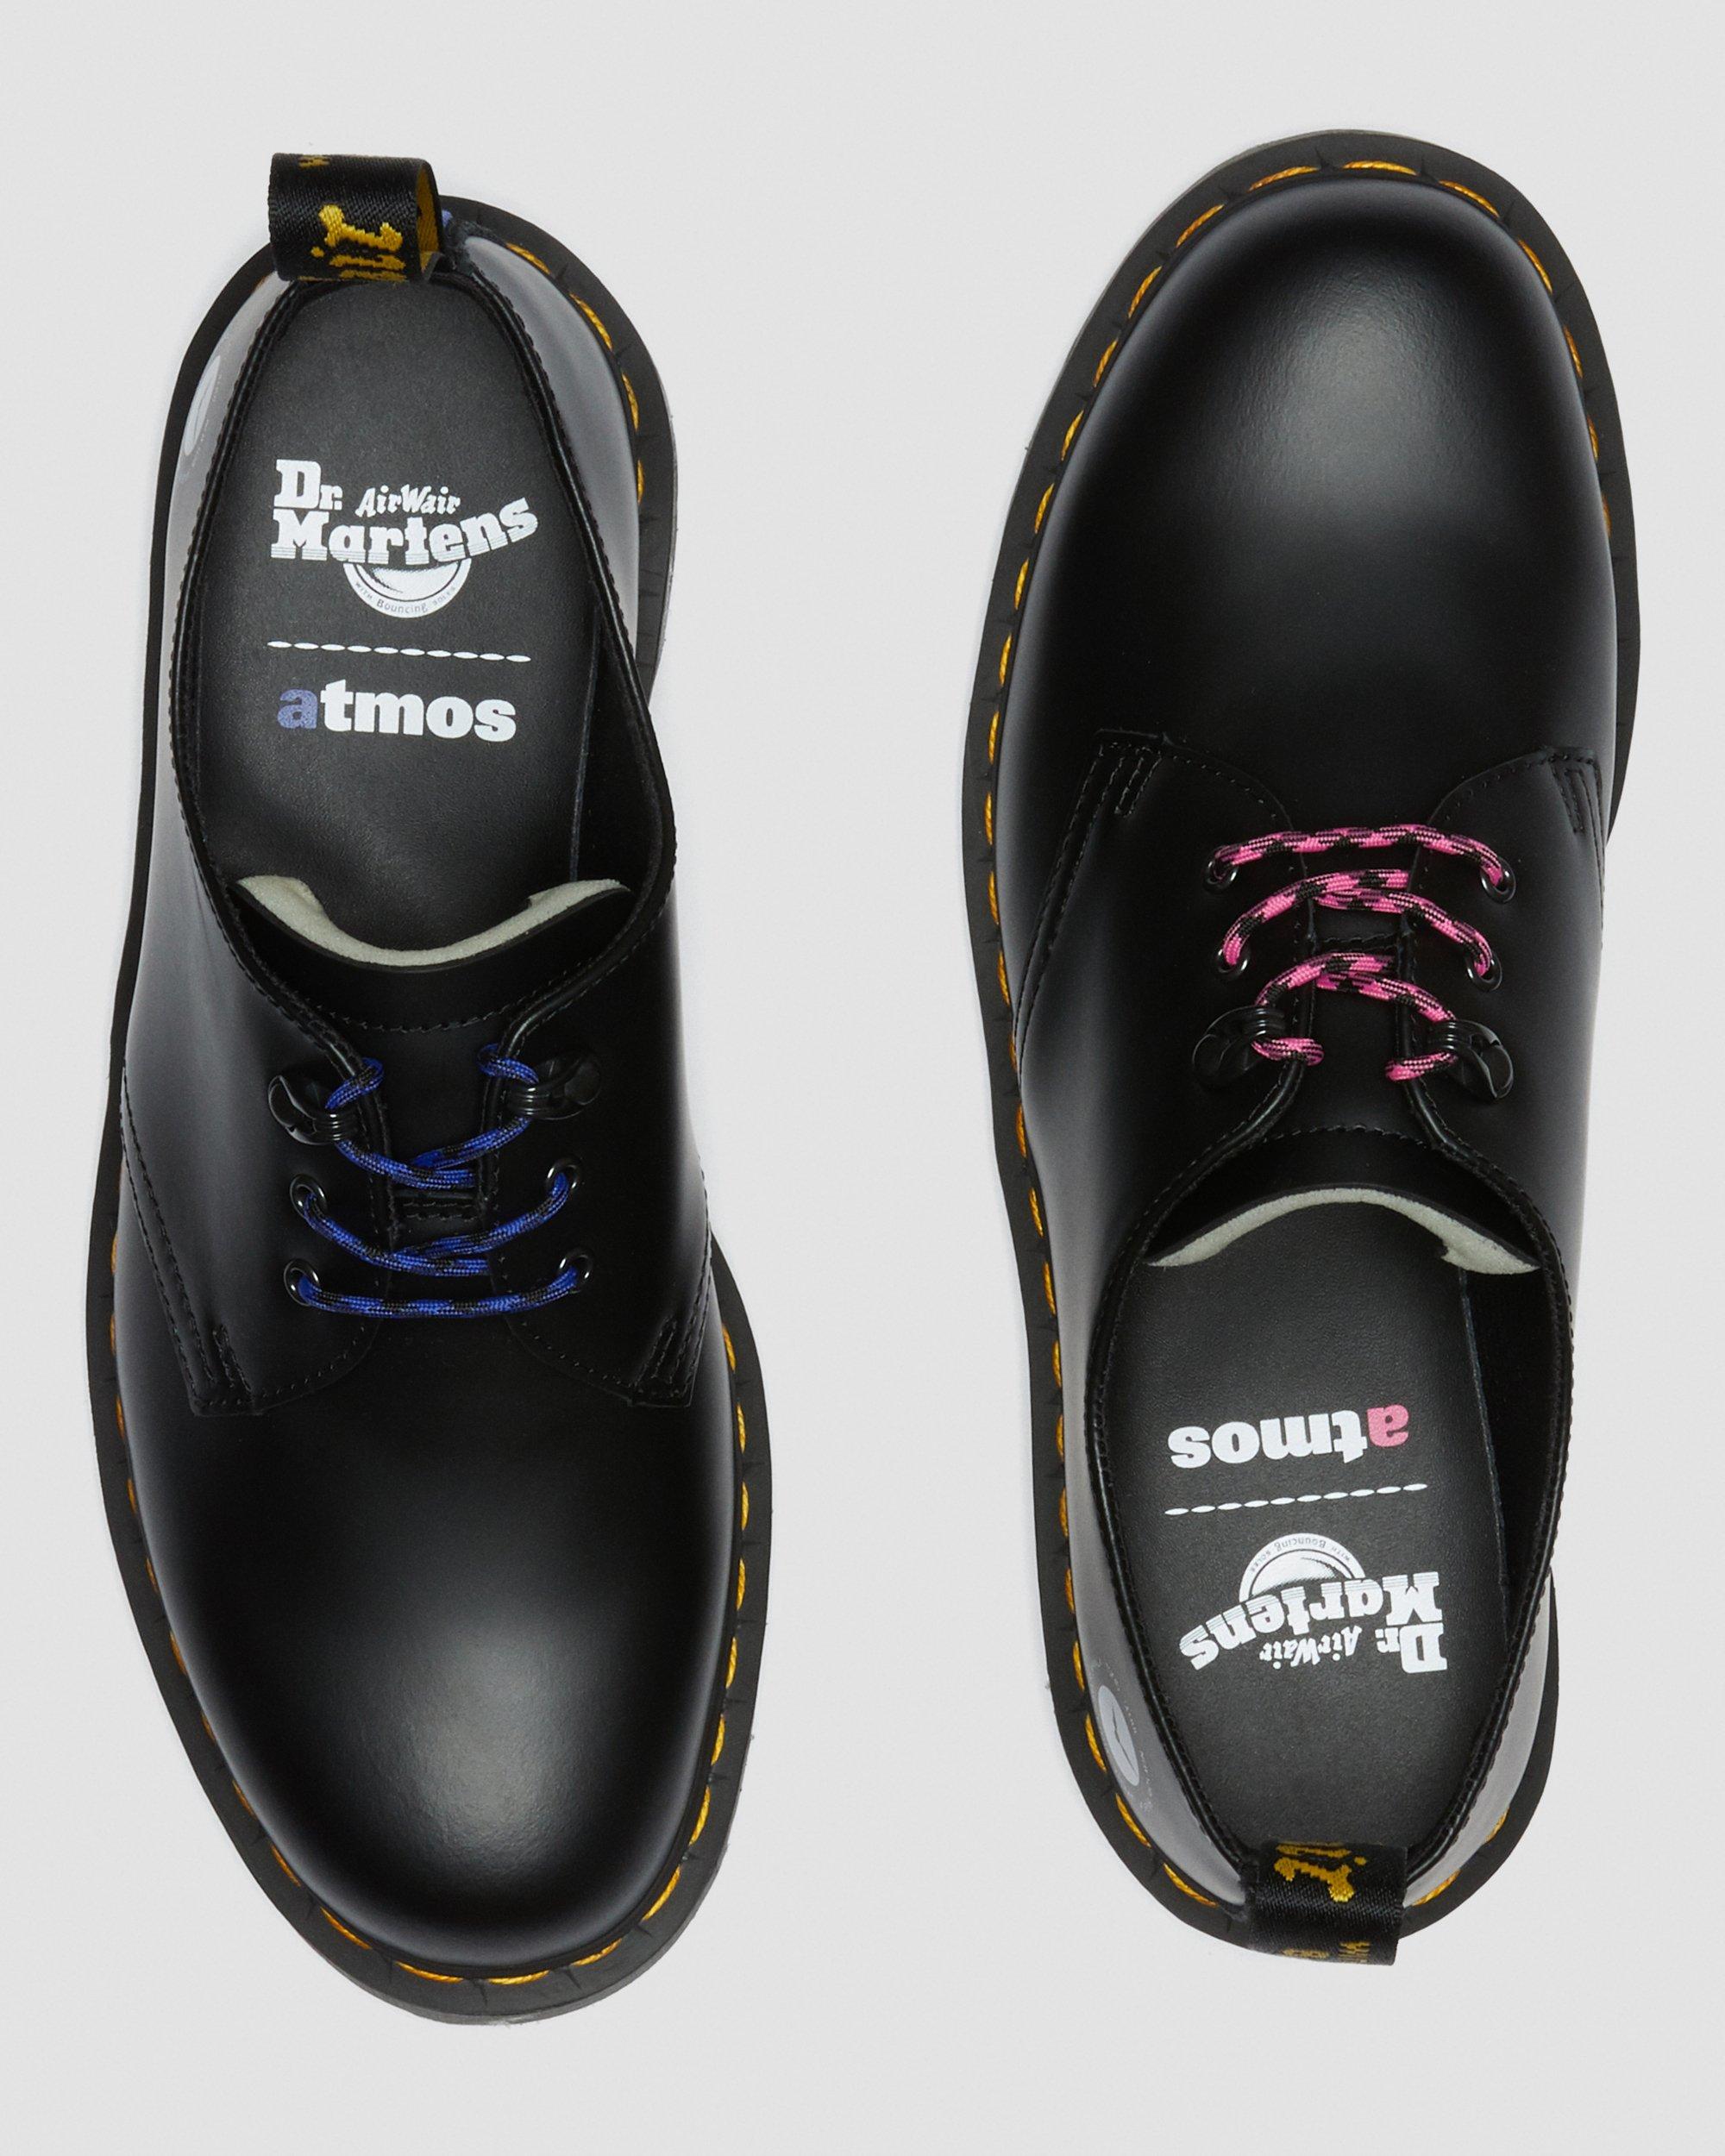 DR MARTENS 1461 Atmos Leather Shoes